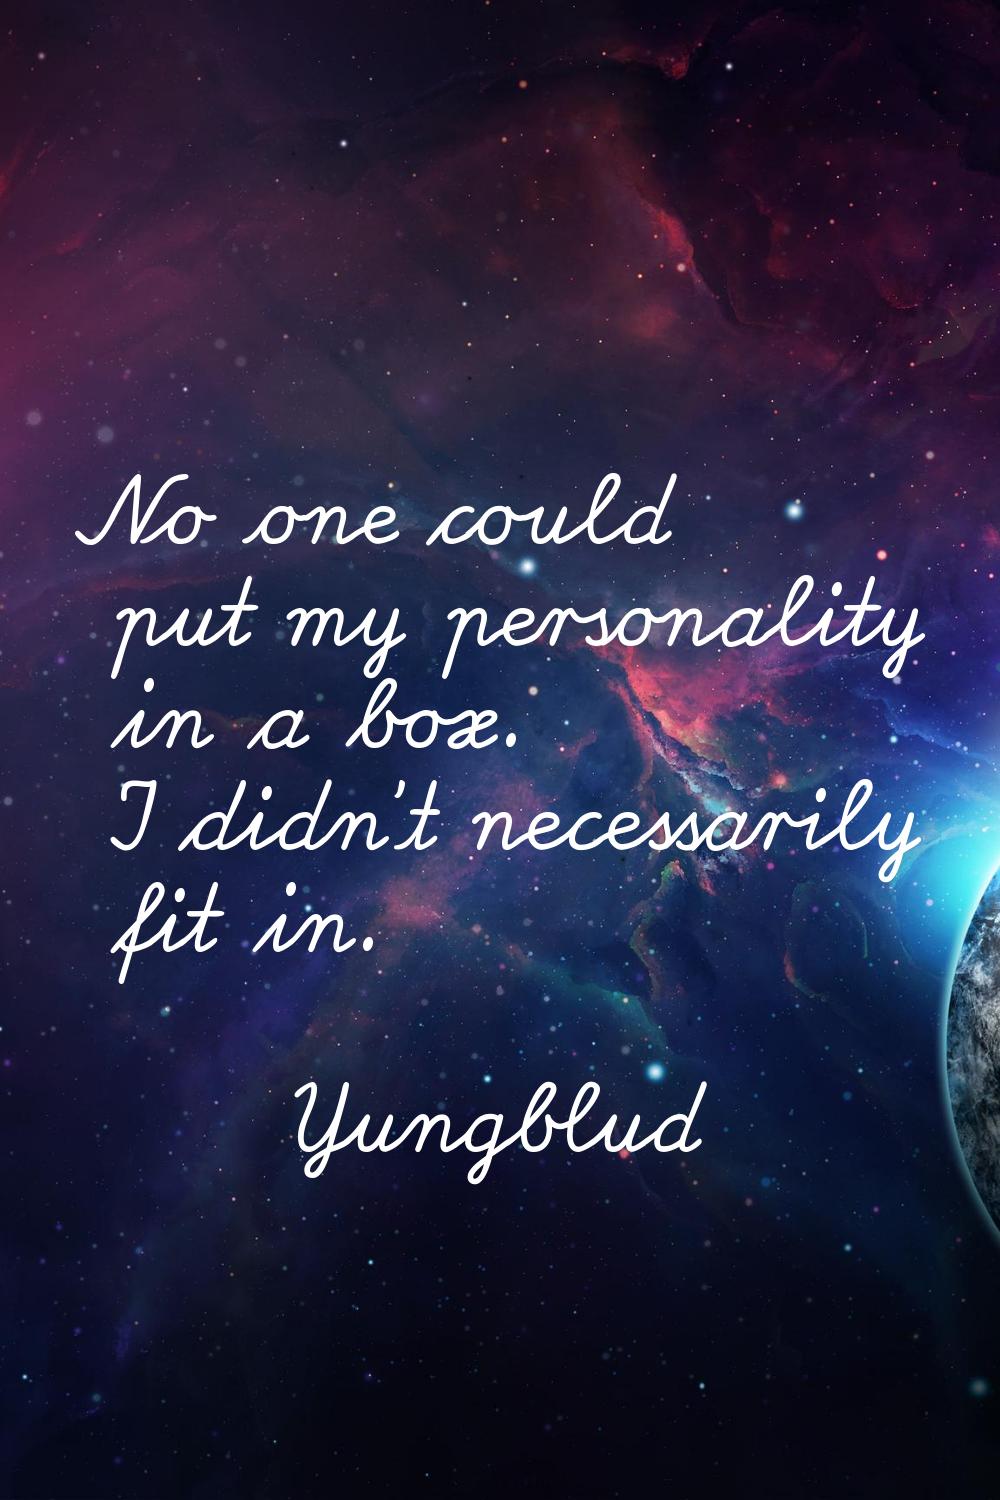 No one could put my personality in a box. I didn't necessarily fit in.